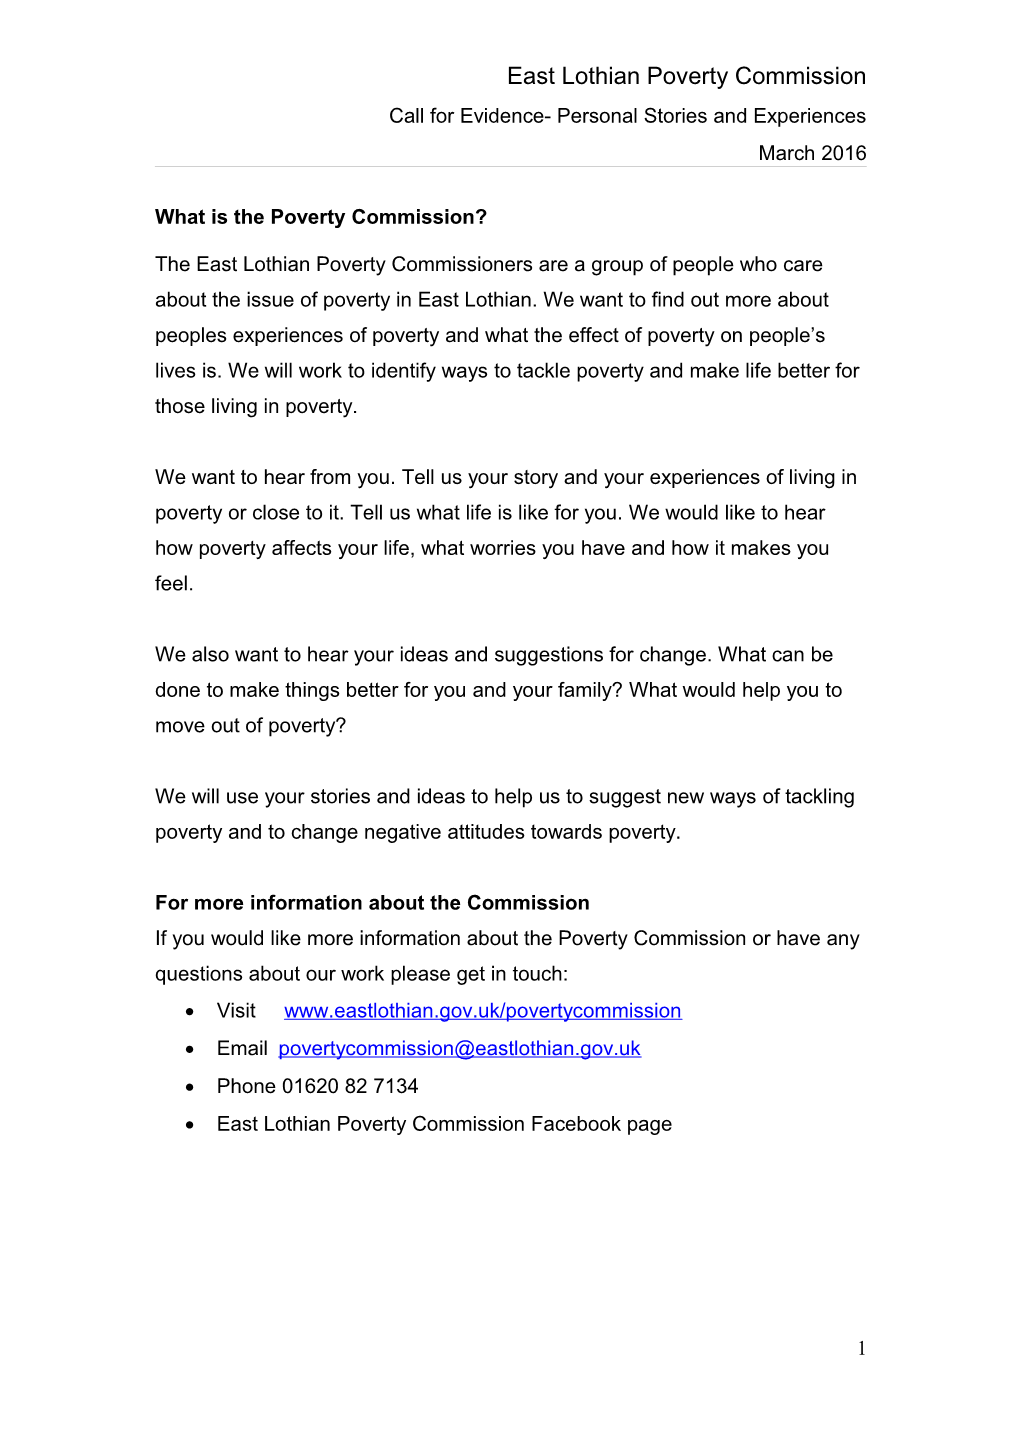 East Lothian Poverty Commission